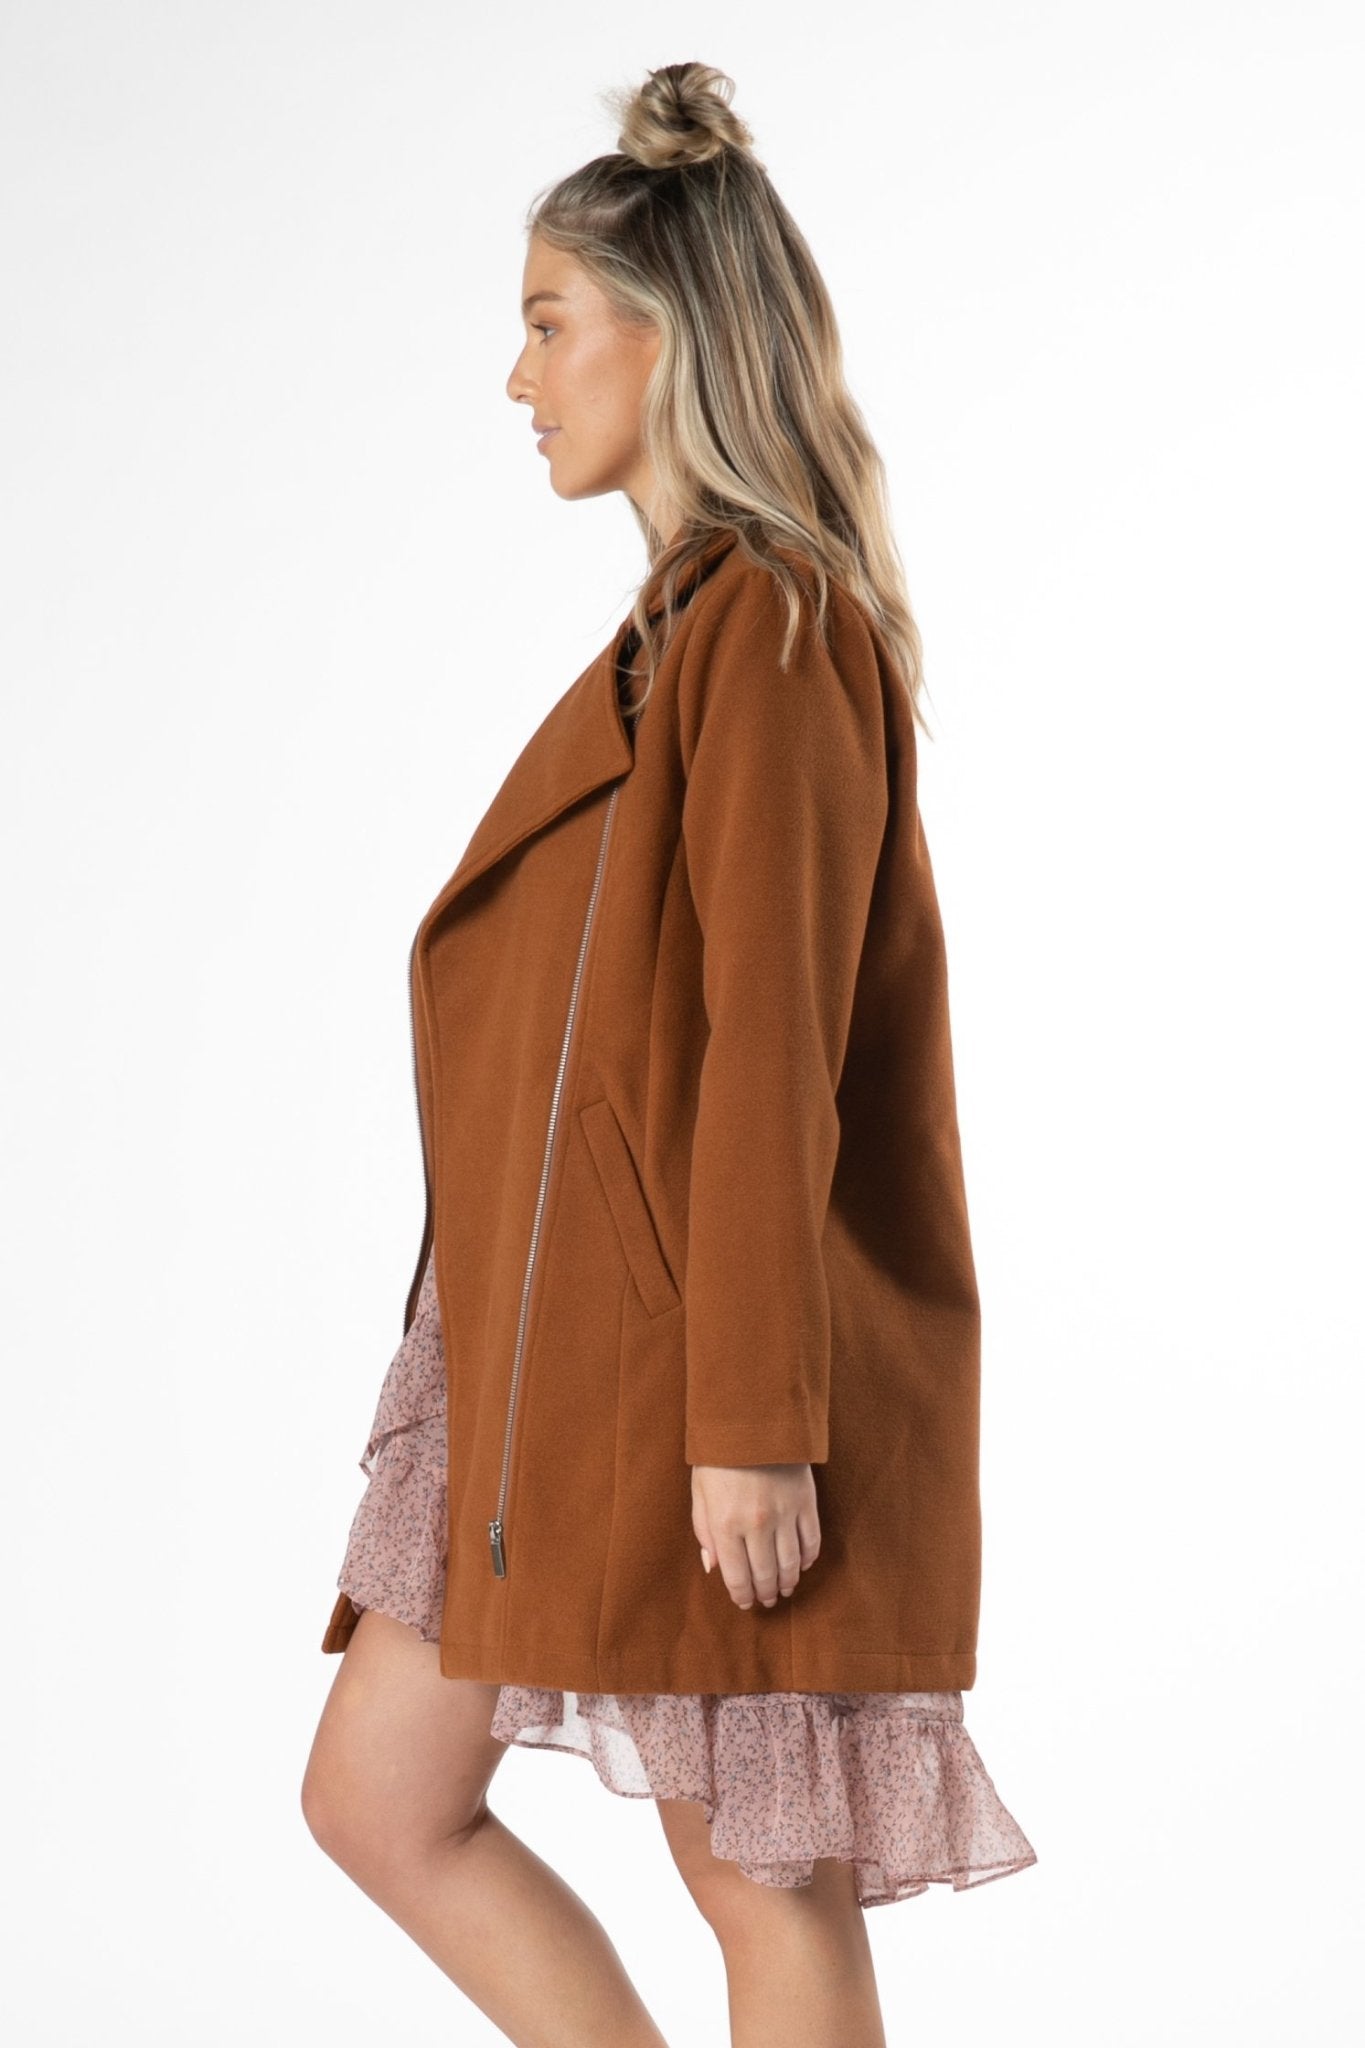 Sass Lydia Double Breasted Jacket in Amber - Hey Sara